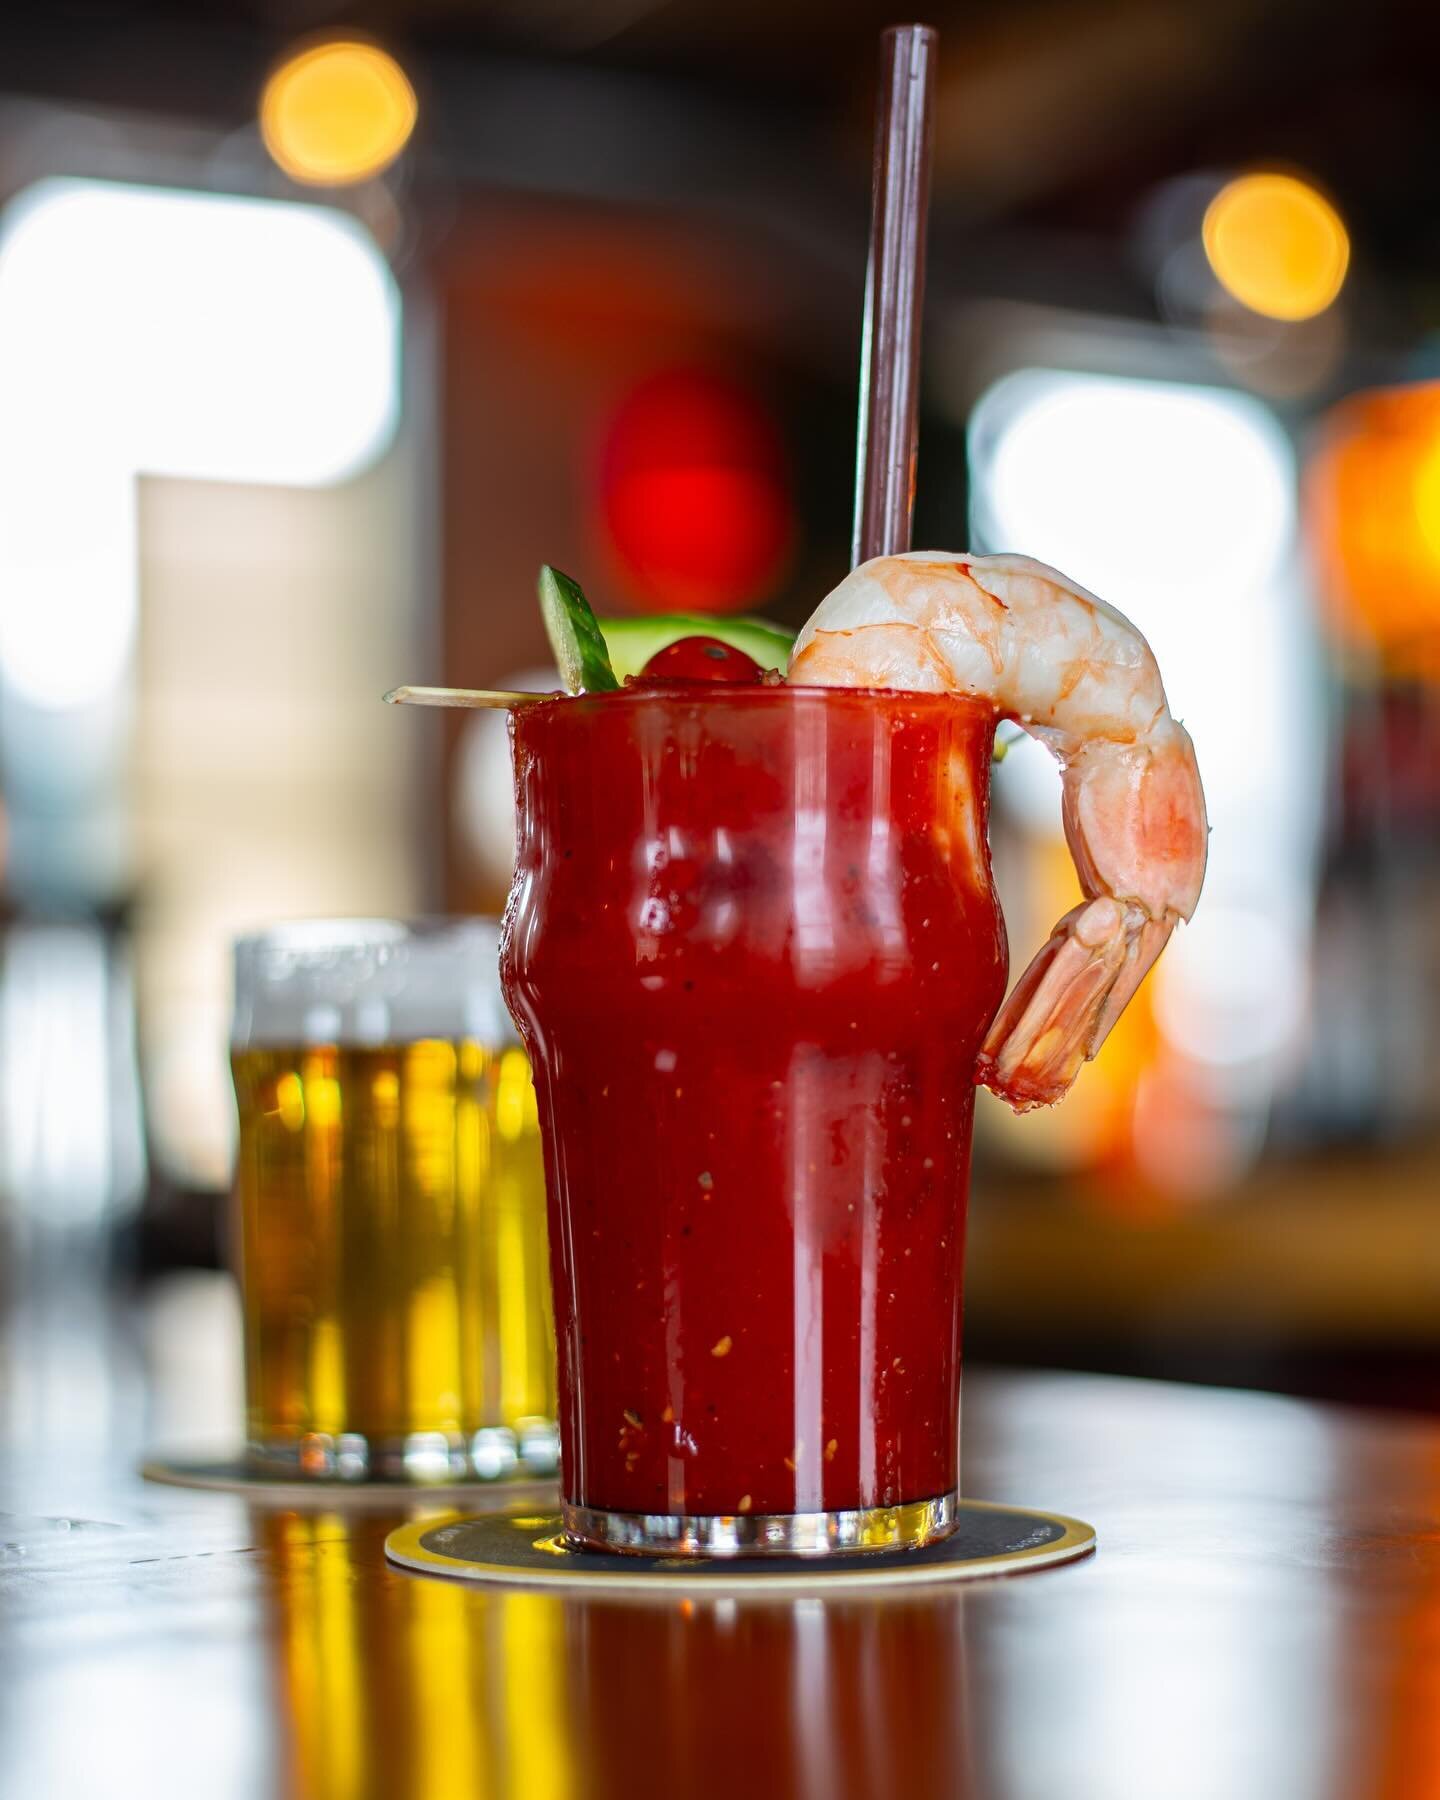 Brunch drinks hit different at Turn Key Supper Club! Make your bloody a Crusty Bloody- add a jumbo shrimp to any cocktail and make it a #shrimpcocktail 
🍤 🍅 
#brunch #clubcrusty #turnkeymadison #bloodymaryshrimp